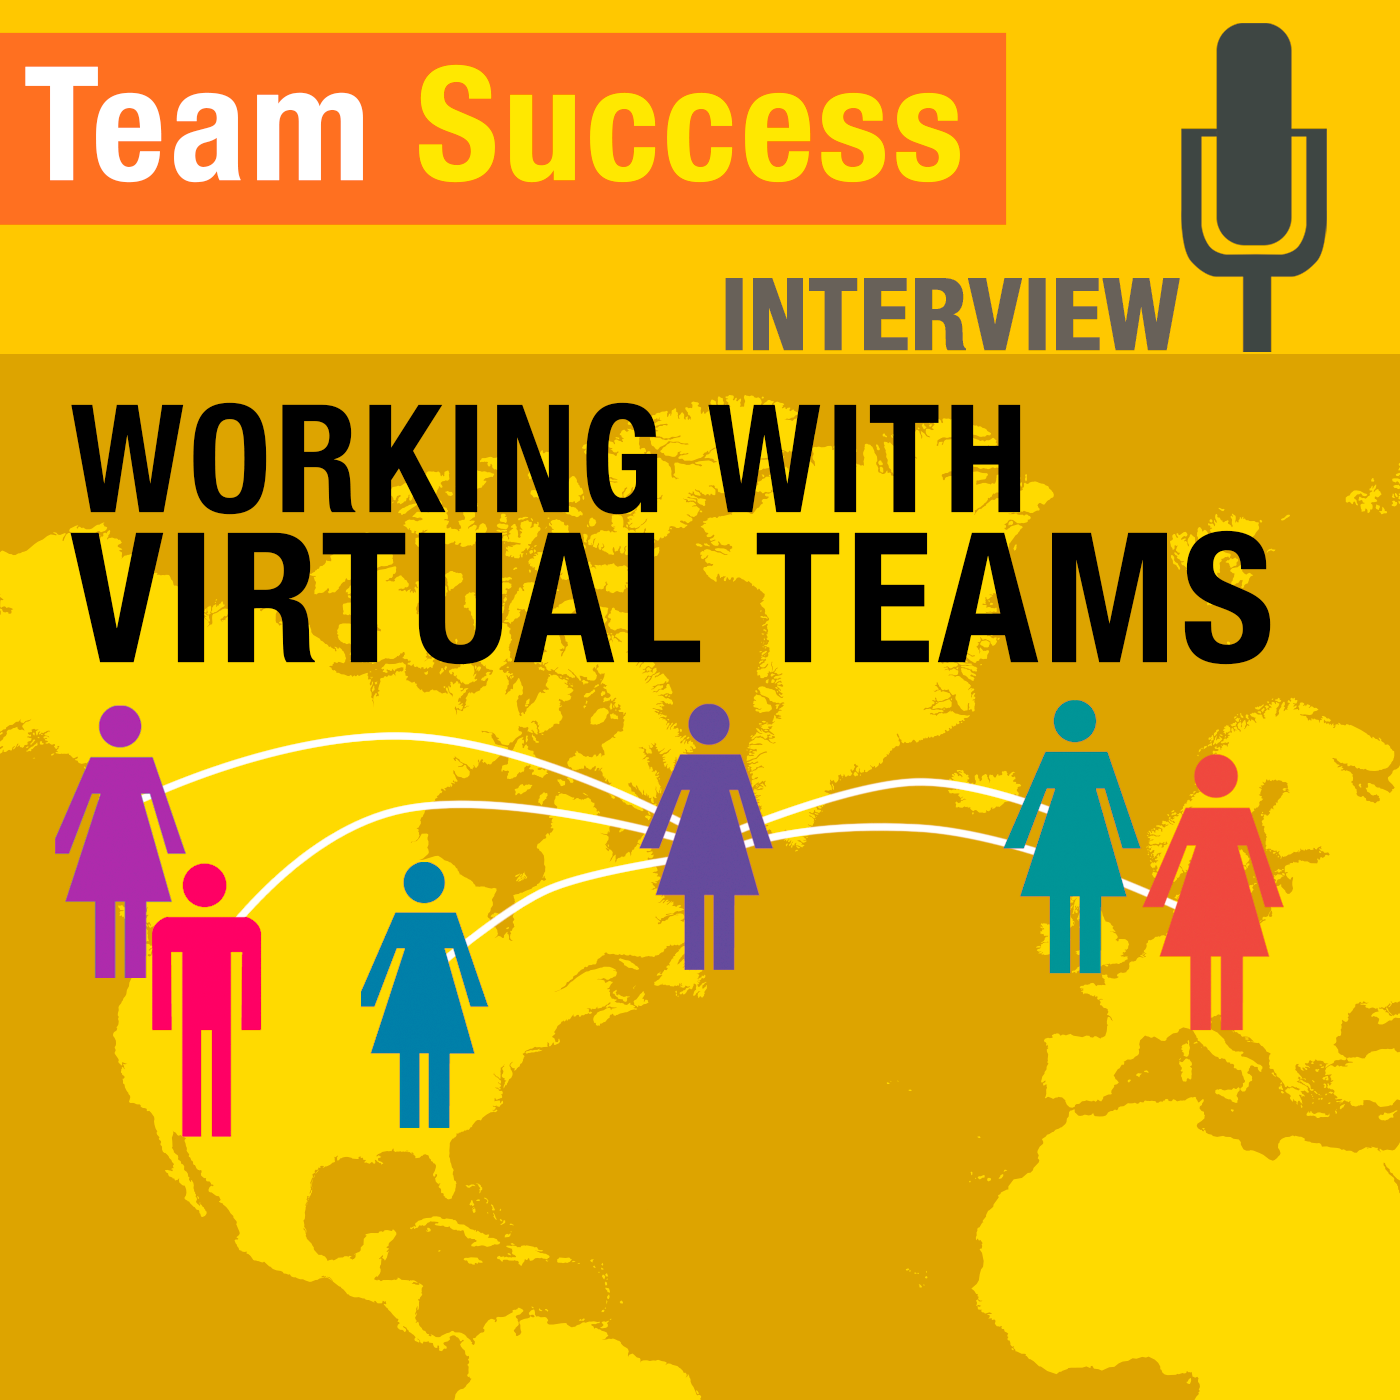 Working With Virtual Teams